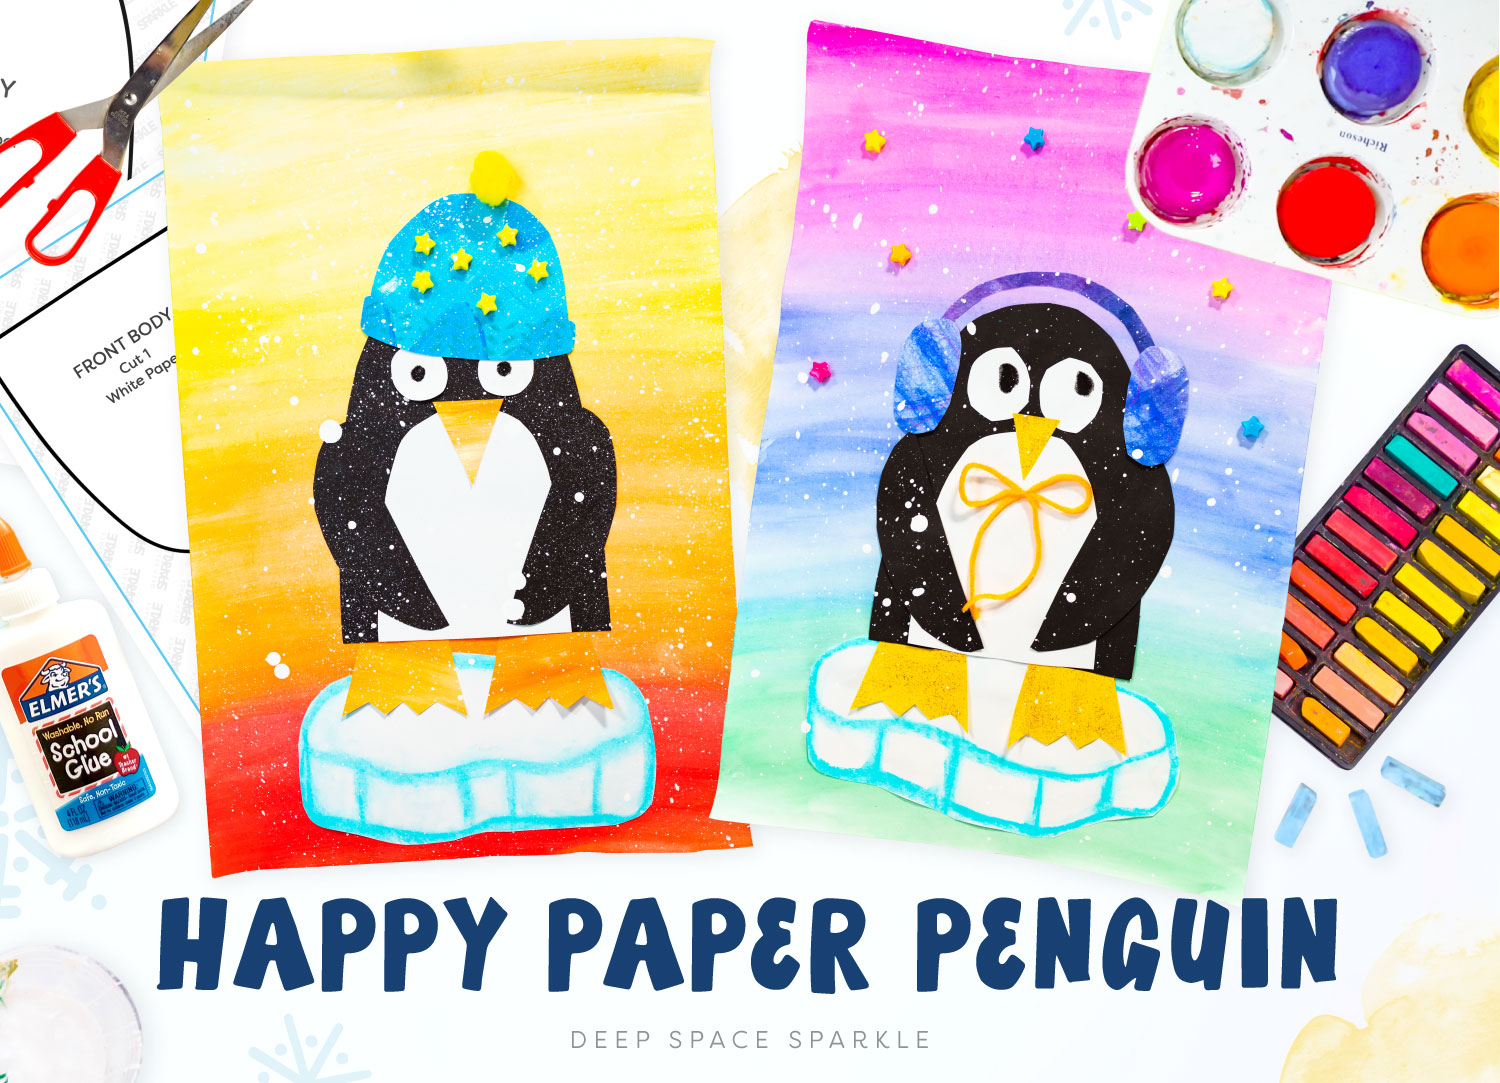 Happy Paper Penguin art project for kids in the art room with free download guide and templates